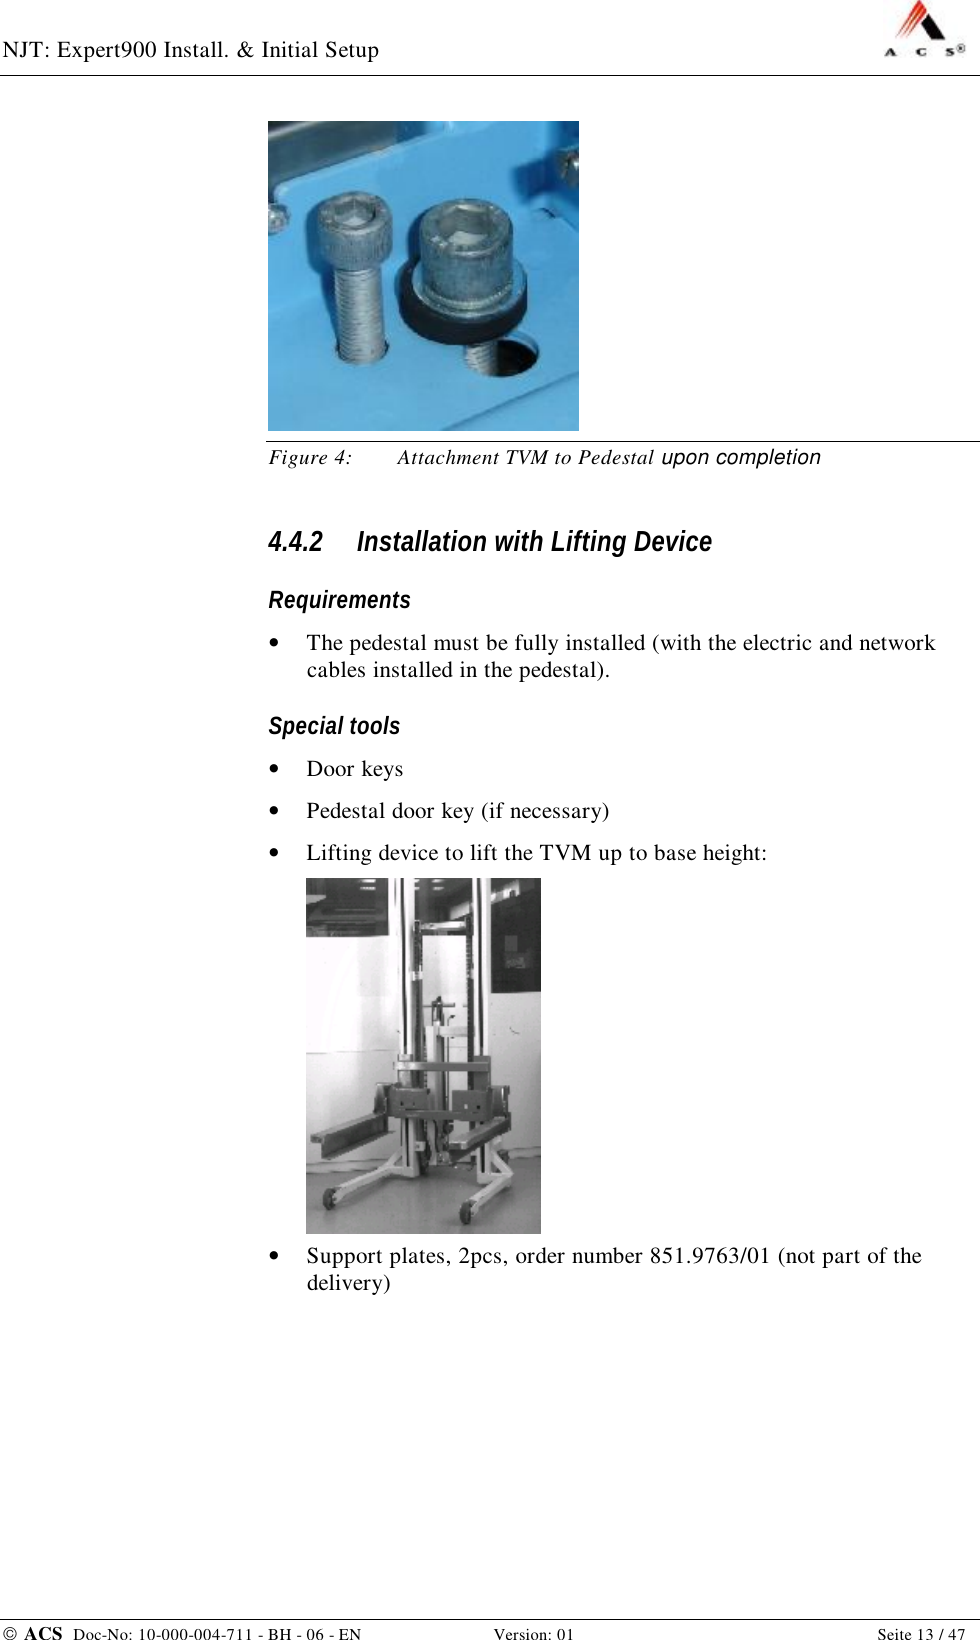 NJT: Expert900 Install. &amp; Initial Setup    ACS  Doc-No: 10-000-004-711 - BH - 06 - EN Version: 01  Seite 13 / 47  Figure 4: Attachment TVM to Pedestal upon completion 4.4.2 Installation with Lifting Device Requirements •  The pedestal must be fully installed (with the electric and network cables installed in the pedestal). Special tools •  Door keys •  Pedestal door key (if necessary) •  Lifting device to lift the TVM up to base height:  •  Support plates, 2pcs, order number 851.9763/01 (not part of the delivery) 